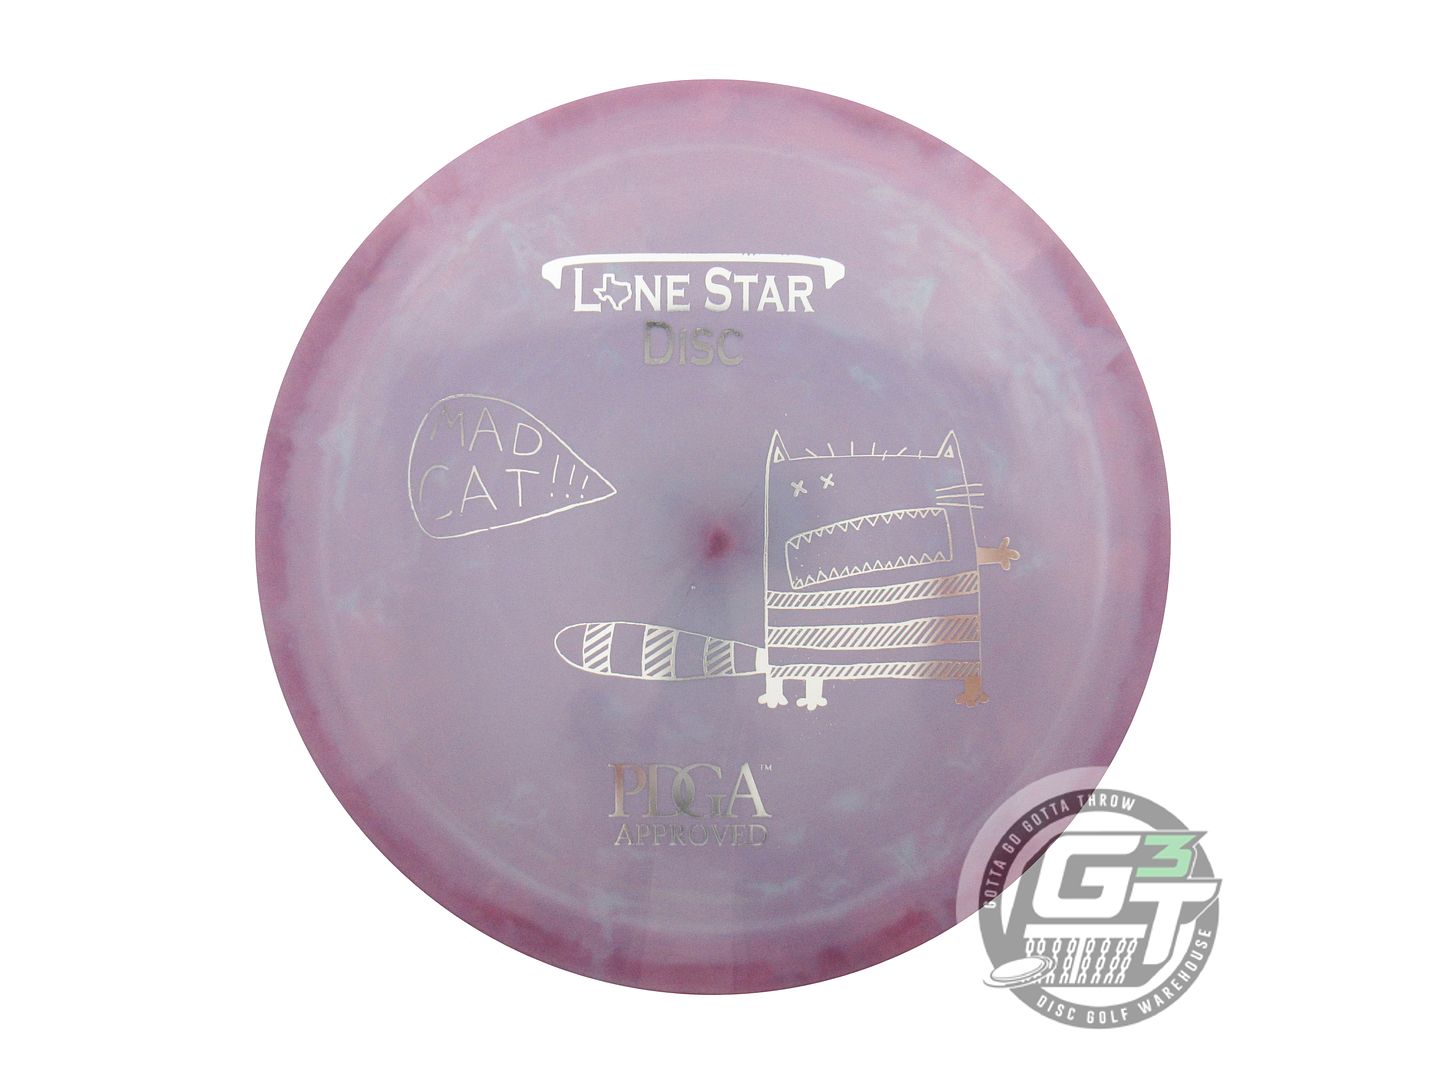 Lone Star Artist Series Lima Mad Cat Fairway Driver Golf Disc (Individually Listed)